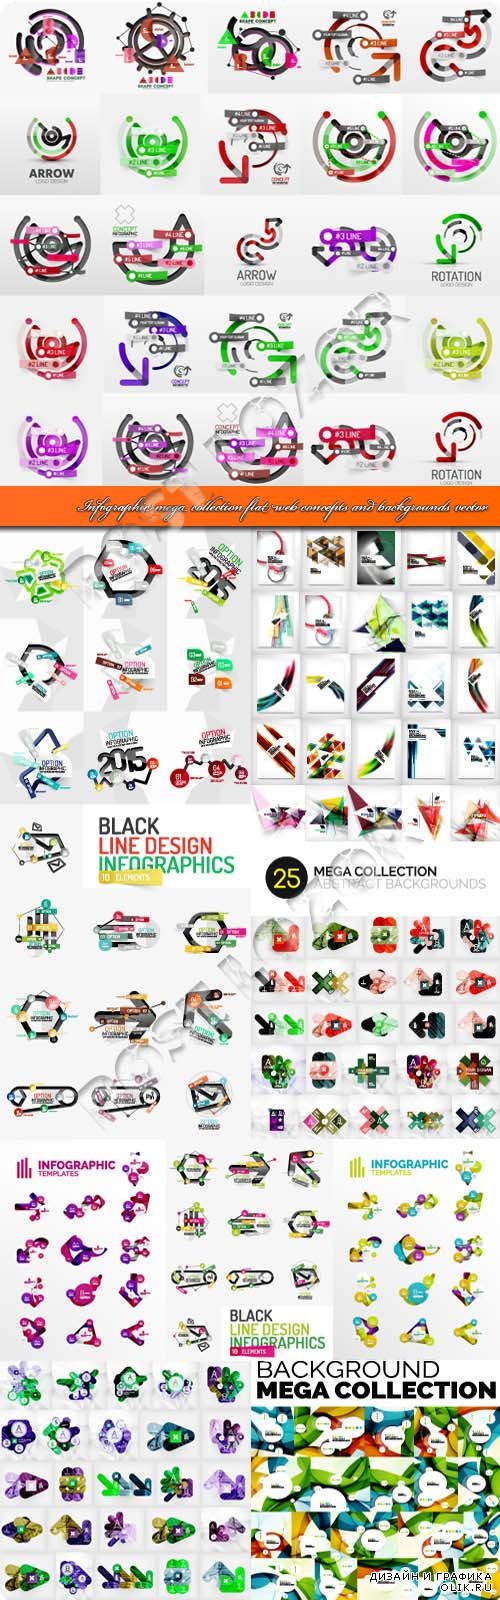 Infographic mega collection flat web concepts and backgrounds vector